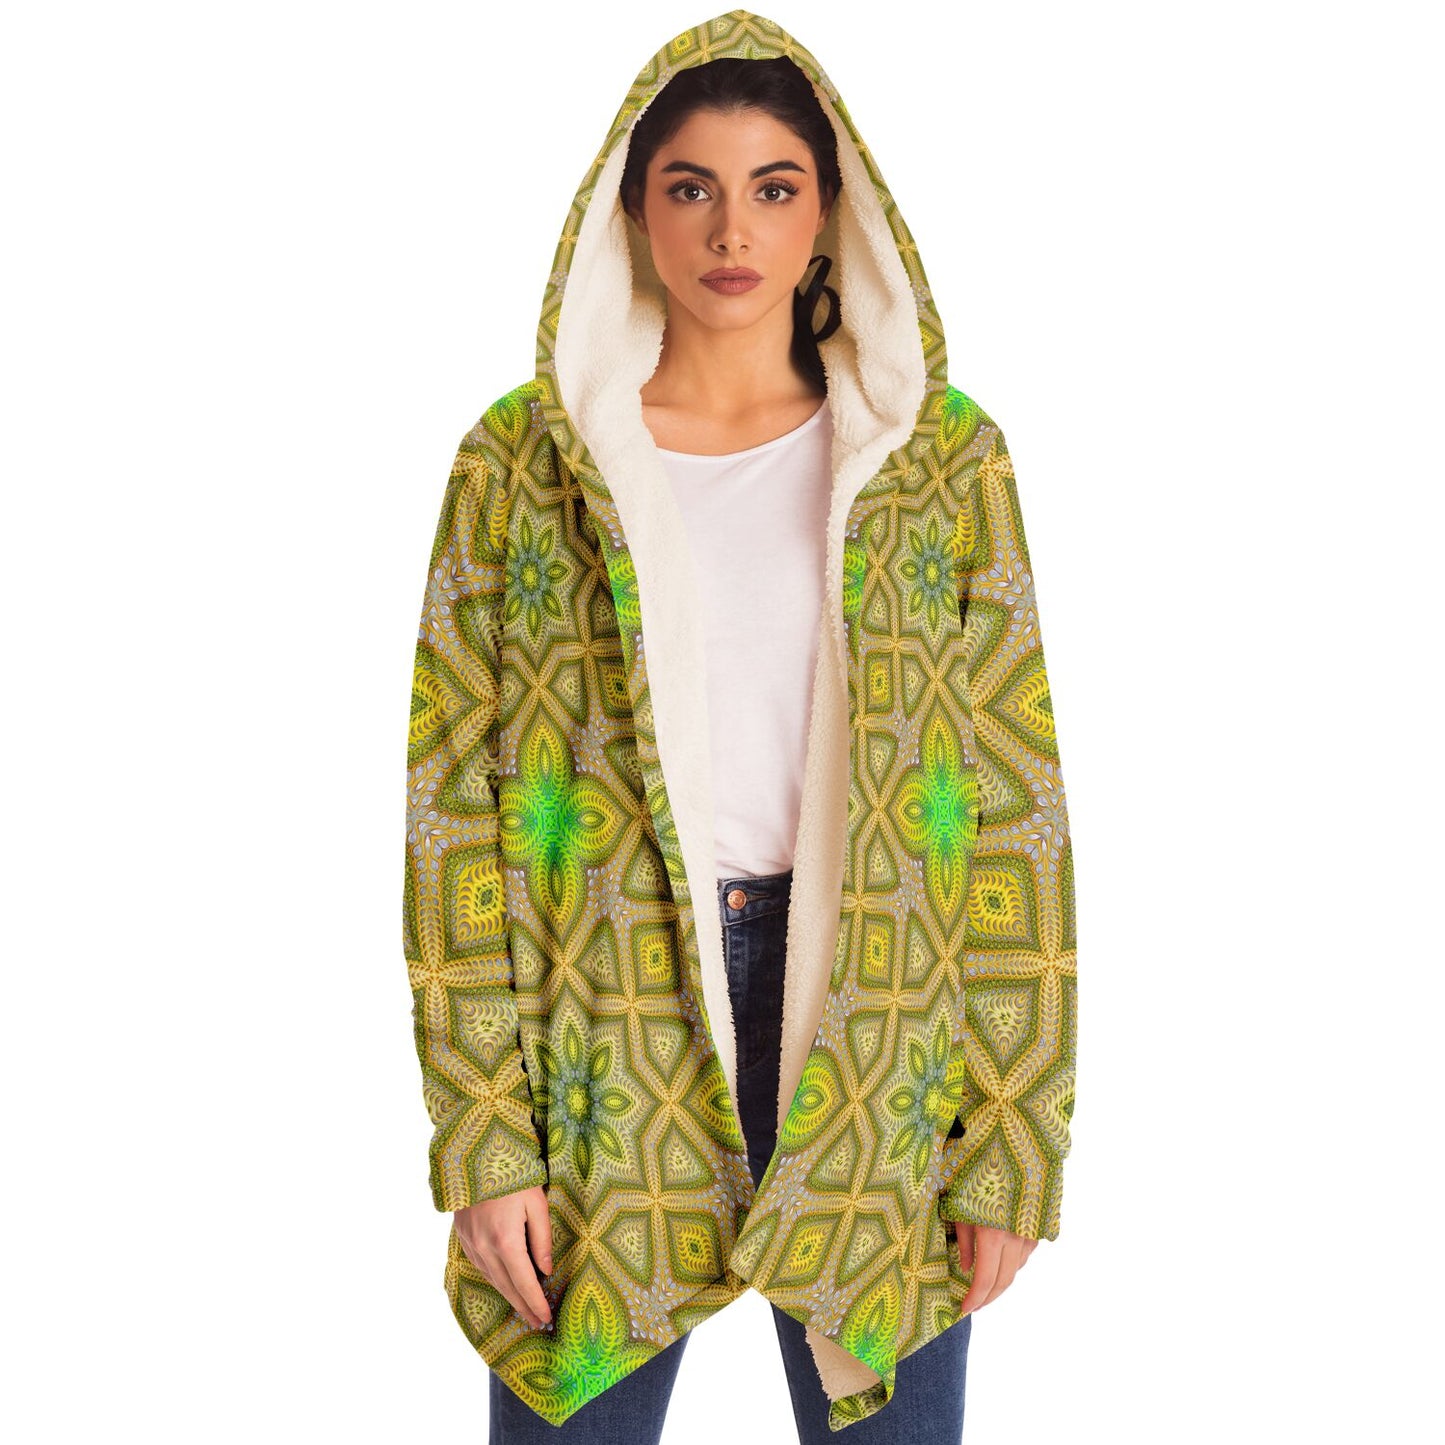 "Activation Initiated" HOODED CLOAK